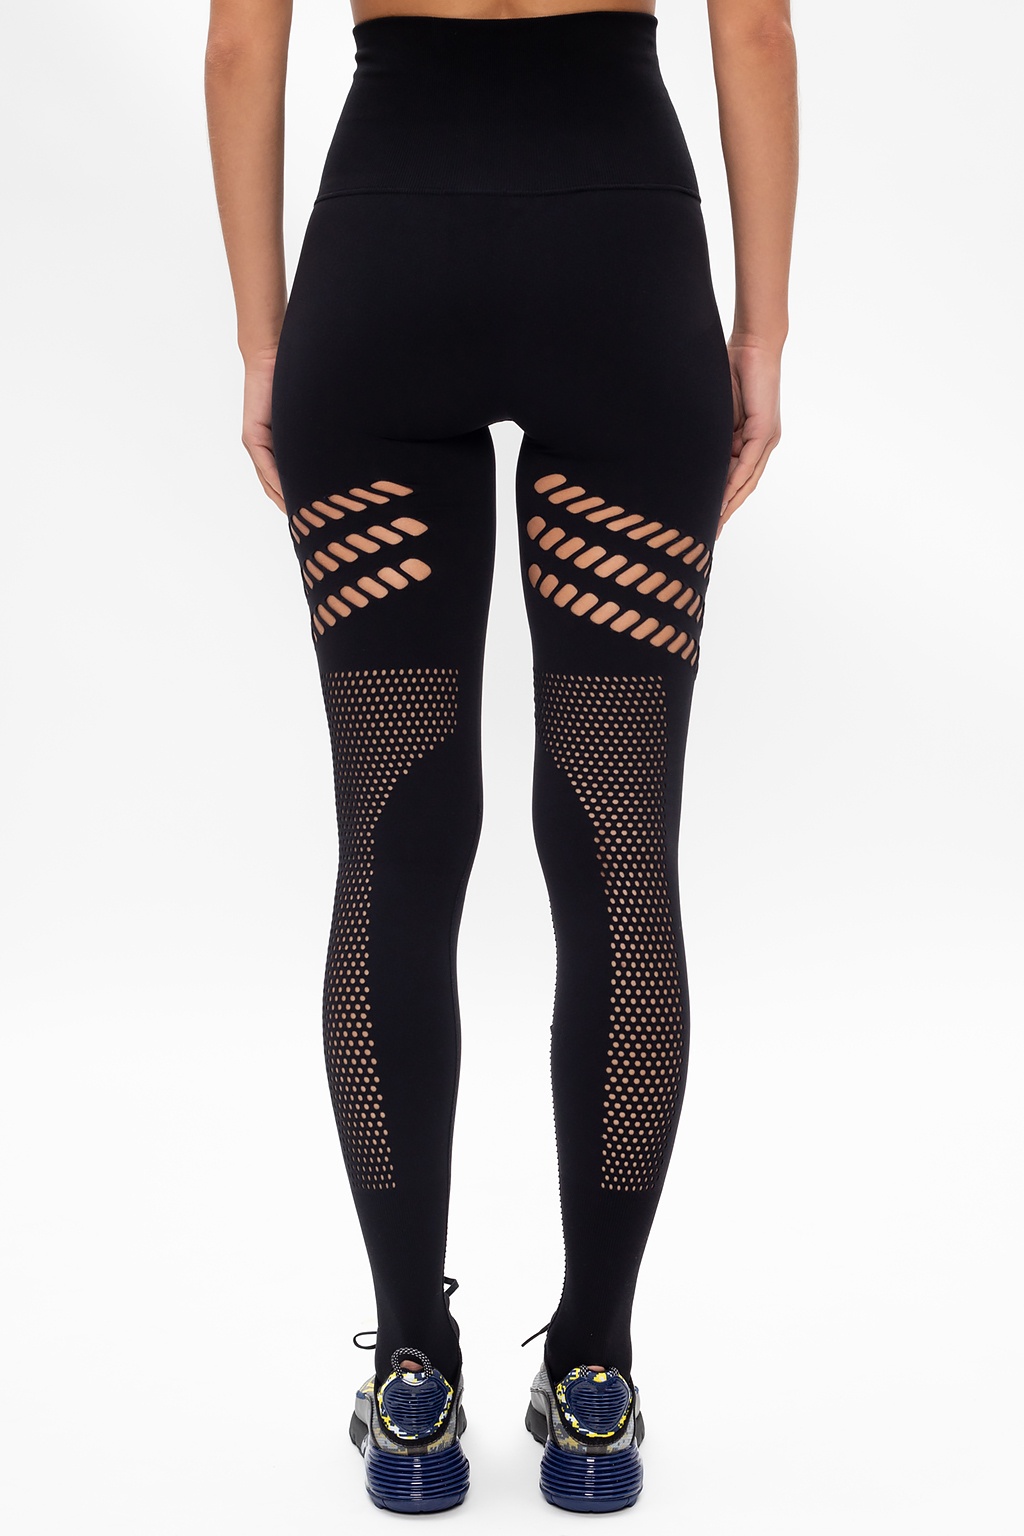 Adidas By Stella Mccartney Yoga Warp Knit Tight  Outfits with leggings,  Activewear fashion, Yoga pants outfit